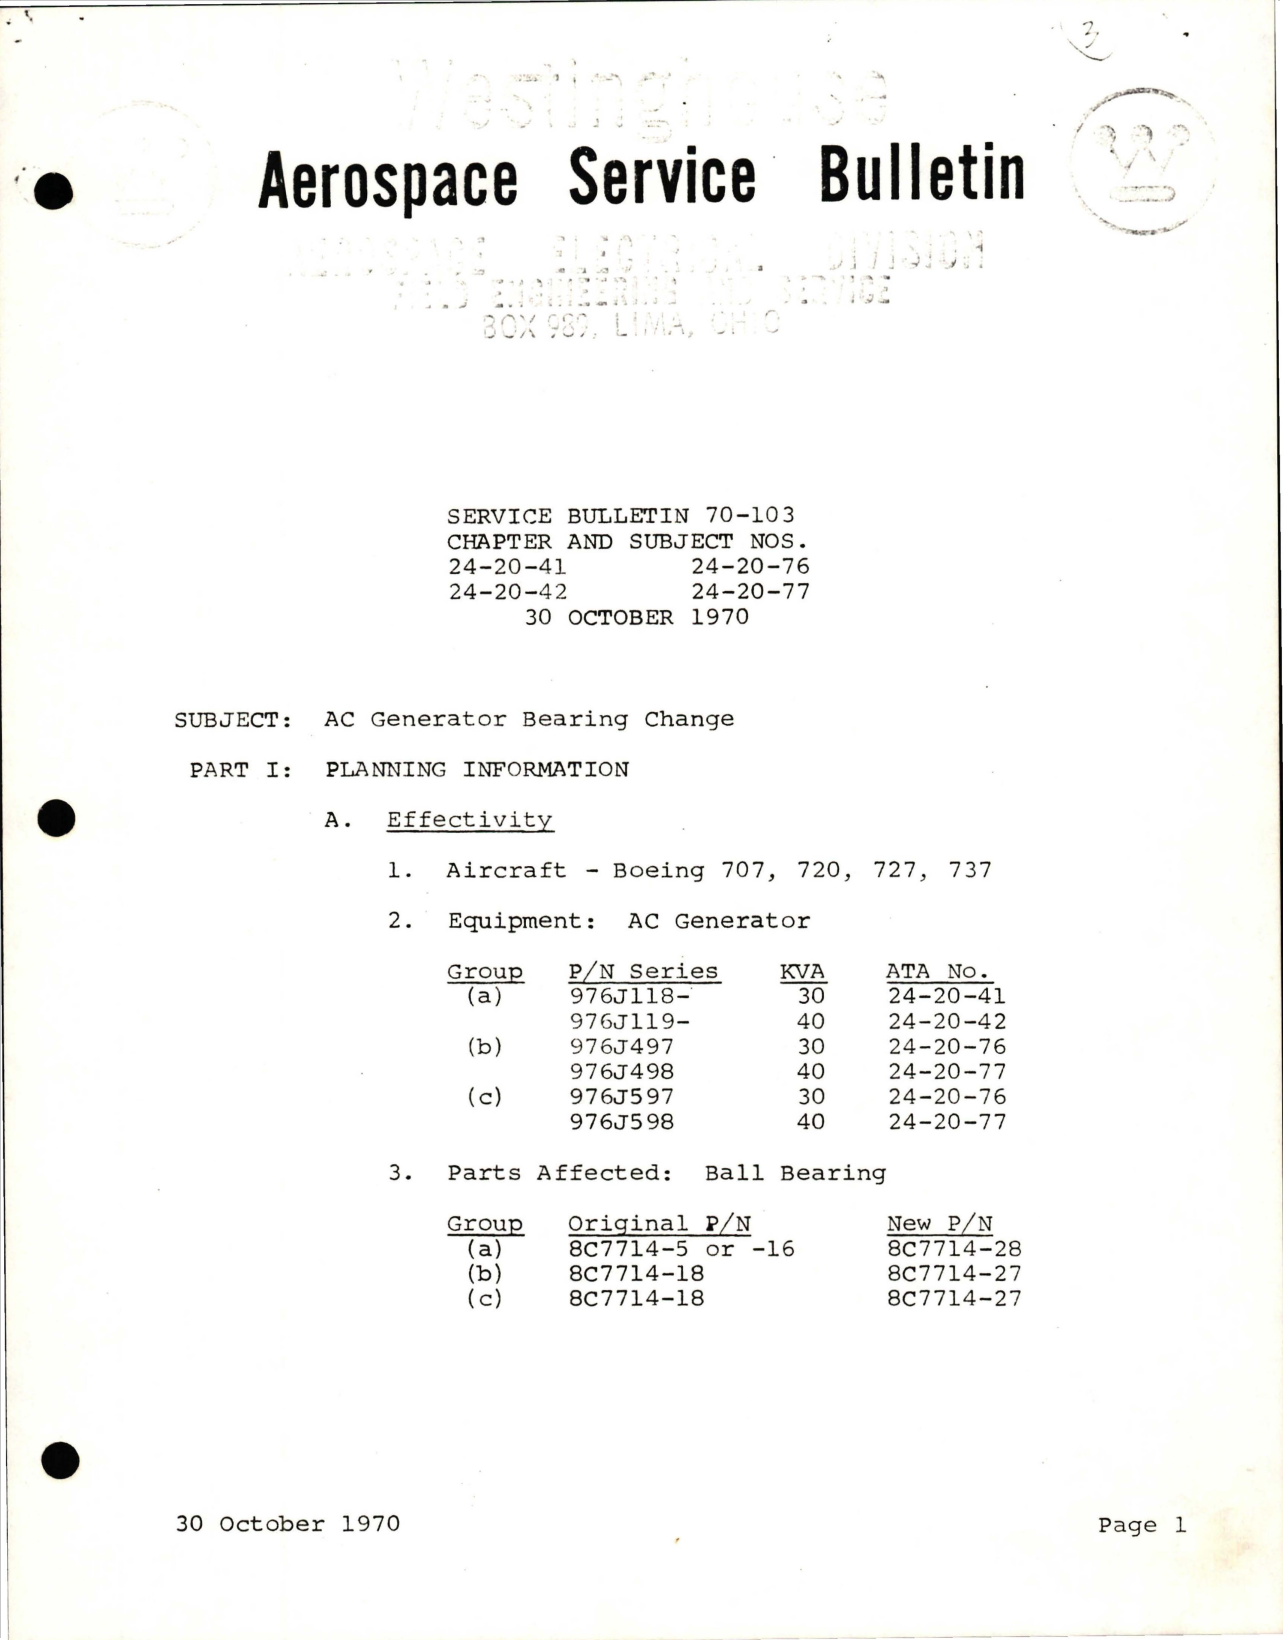 Sample page 1 from AirCorps Library document: AC Generator Bearing Change